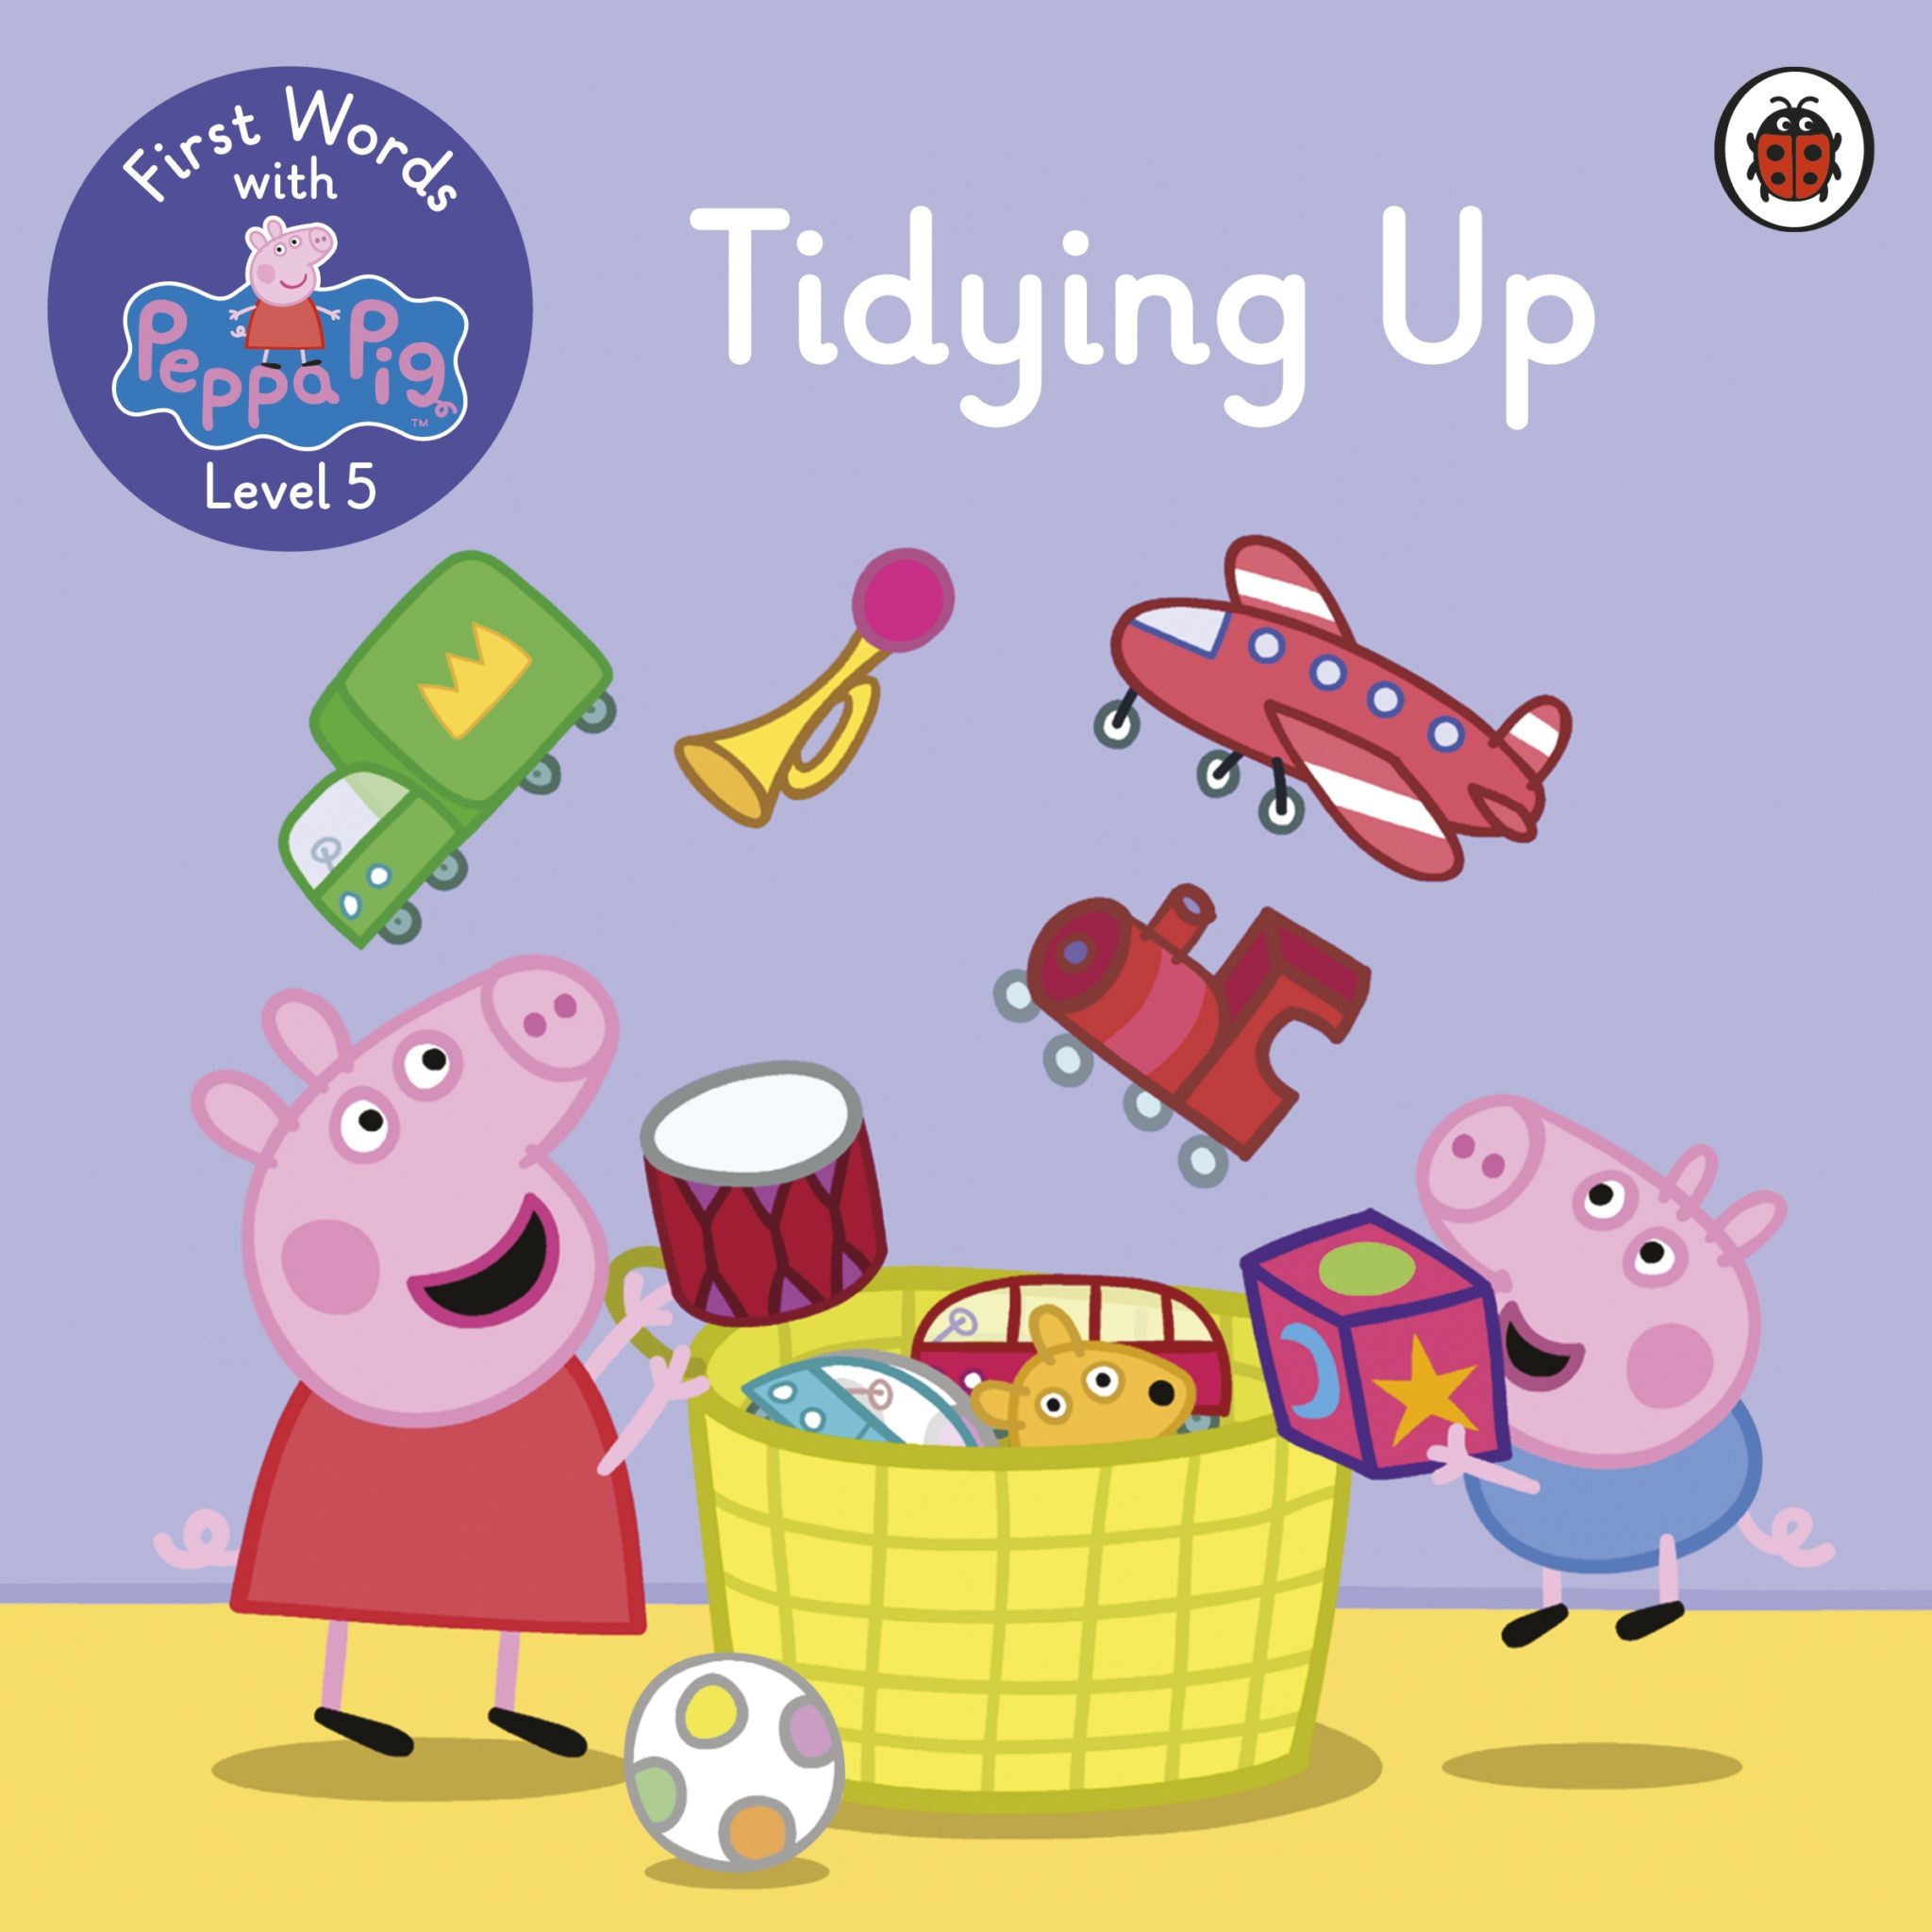 First Words with Peppa Level 5 – Tidying Up – Ladybird Education